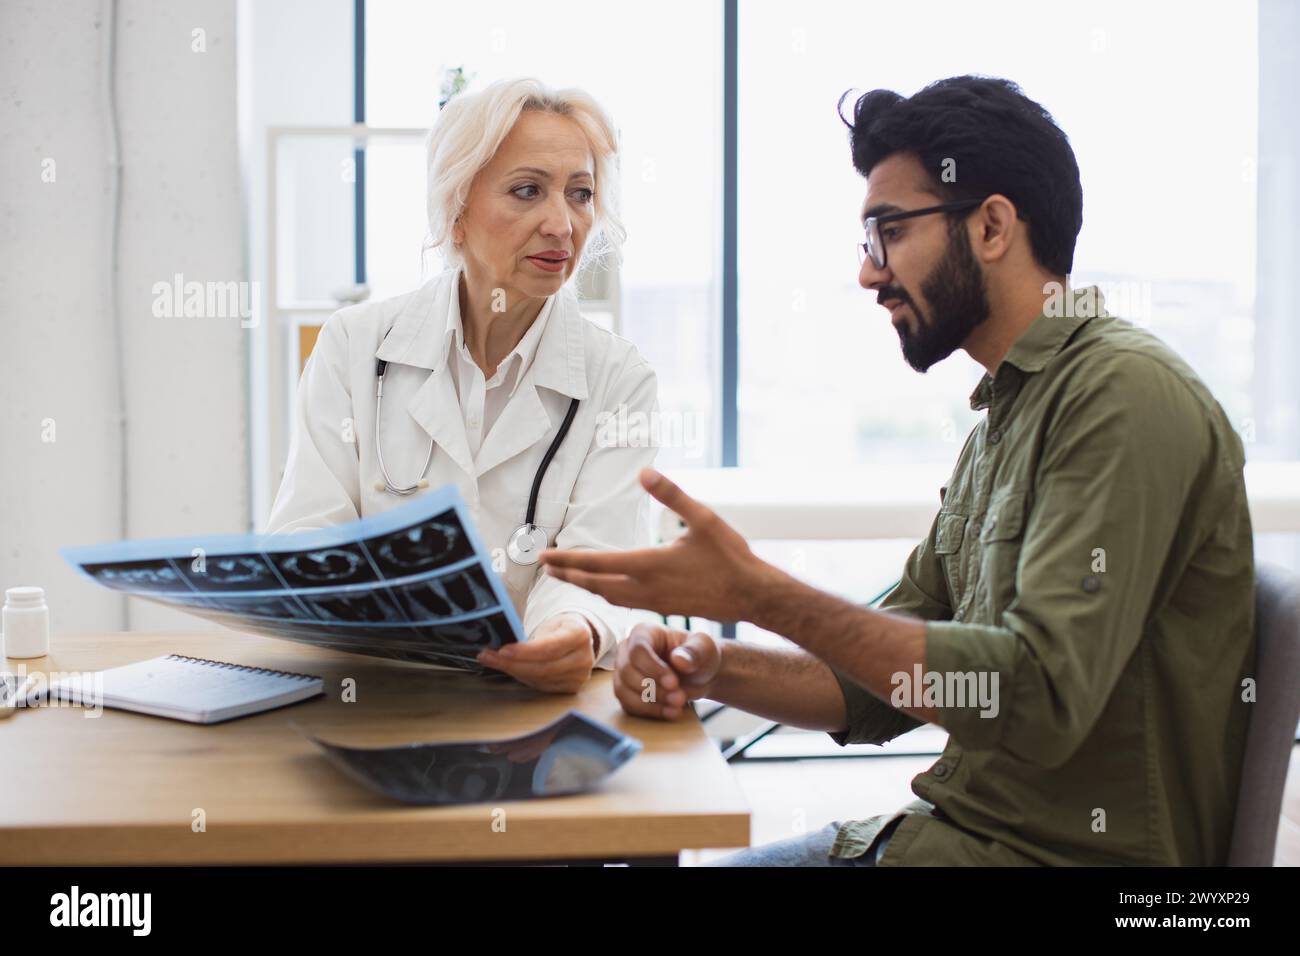 Family doctor examining diagnostic test results while developing treatment plan. Stock Photo